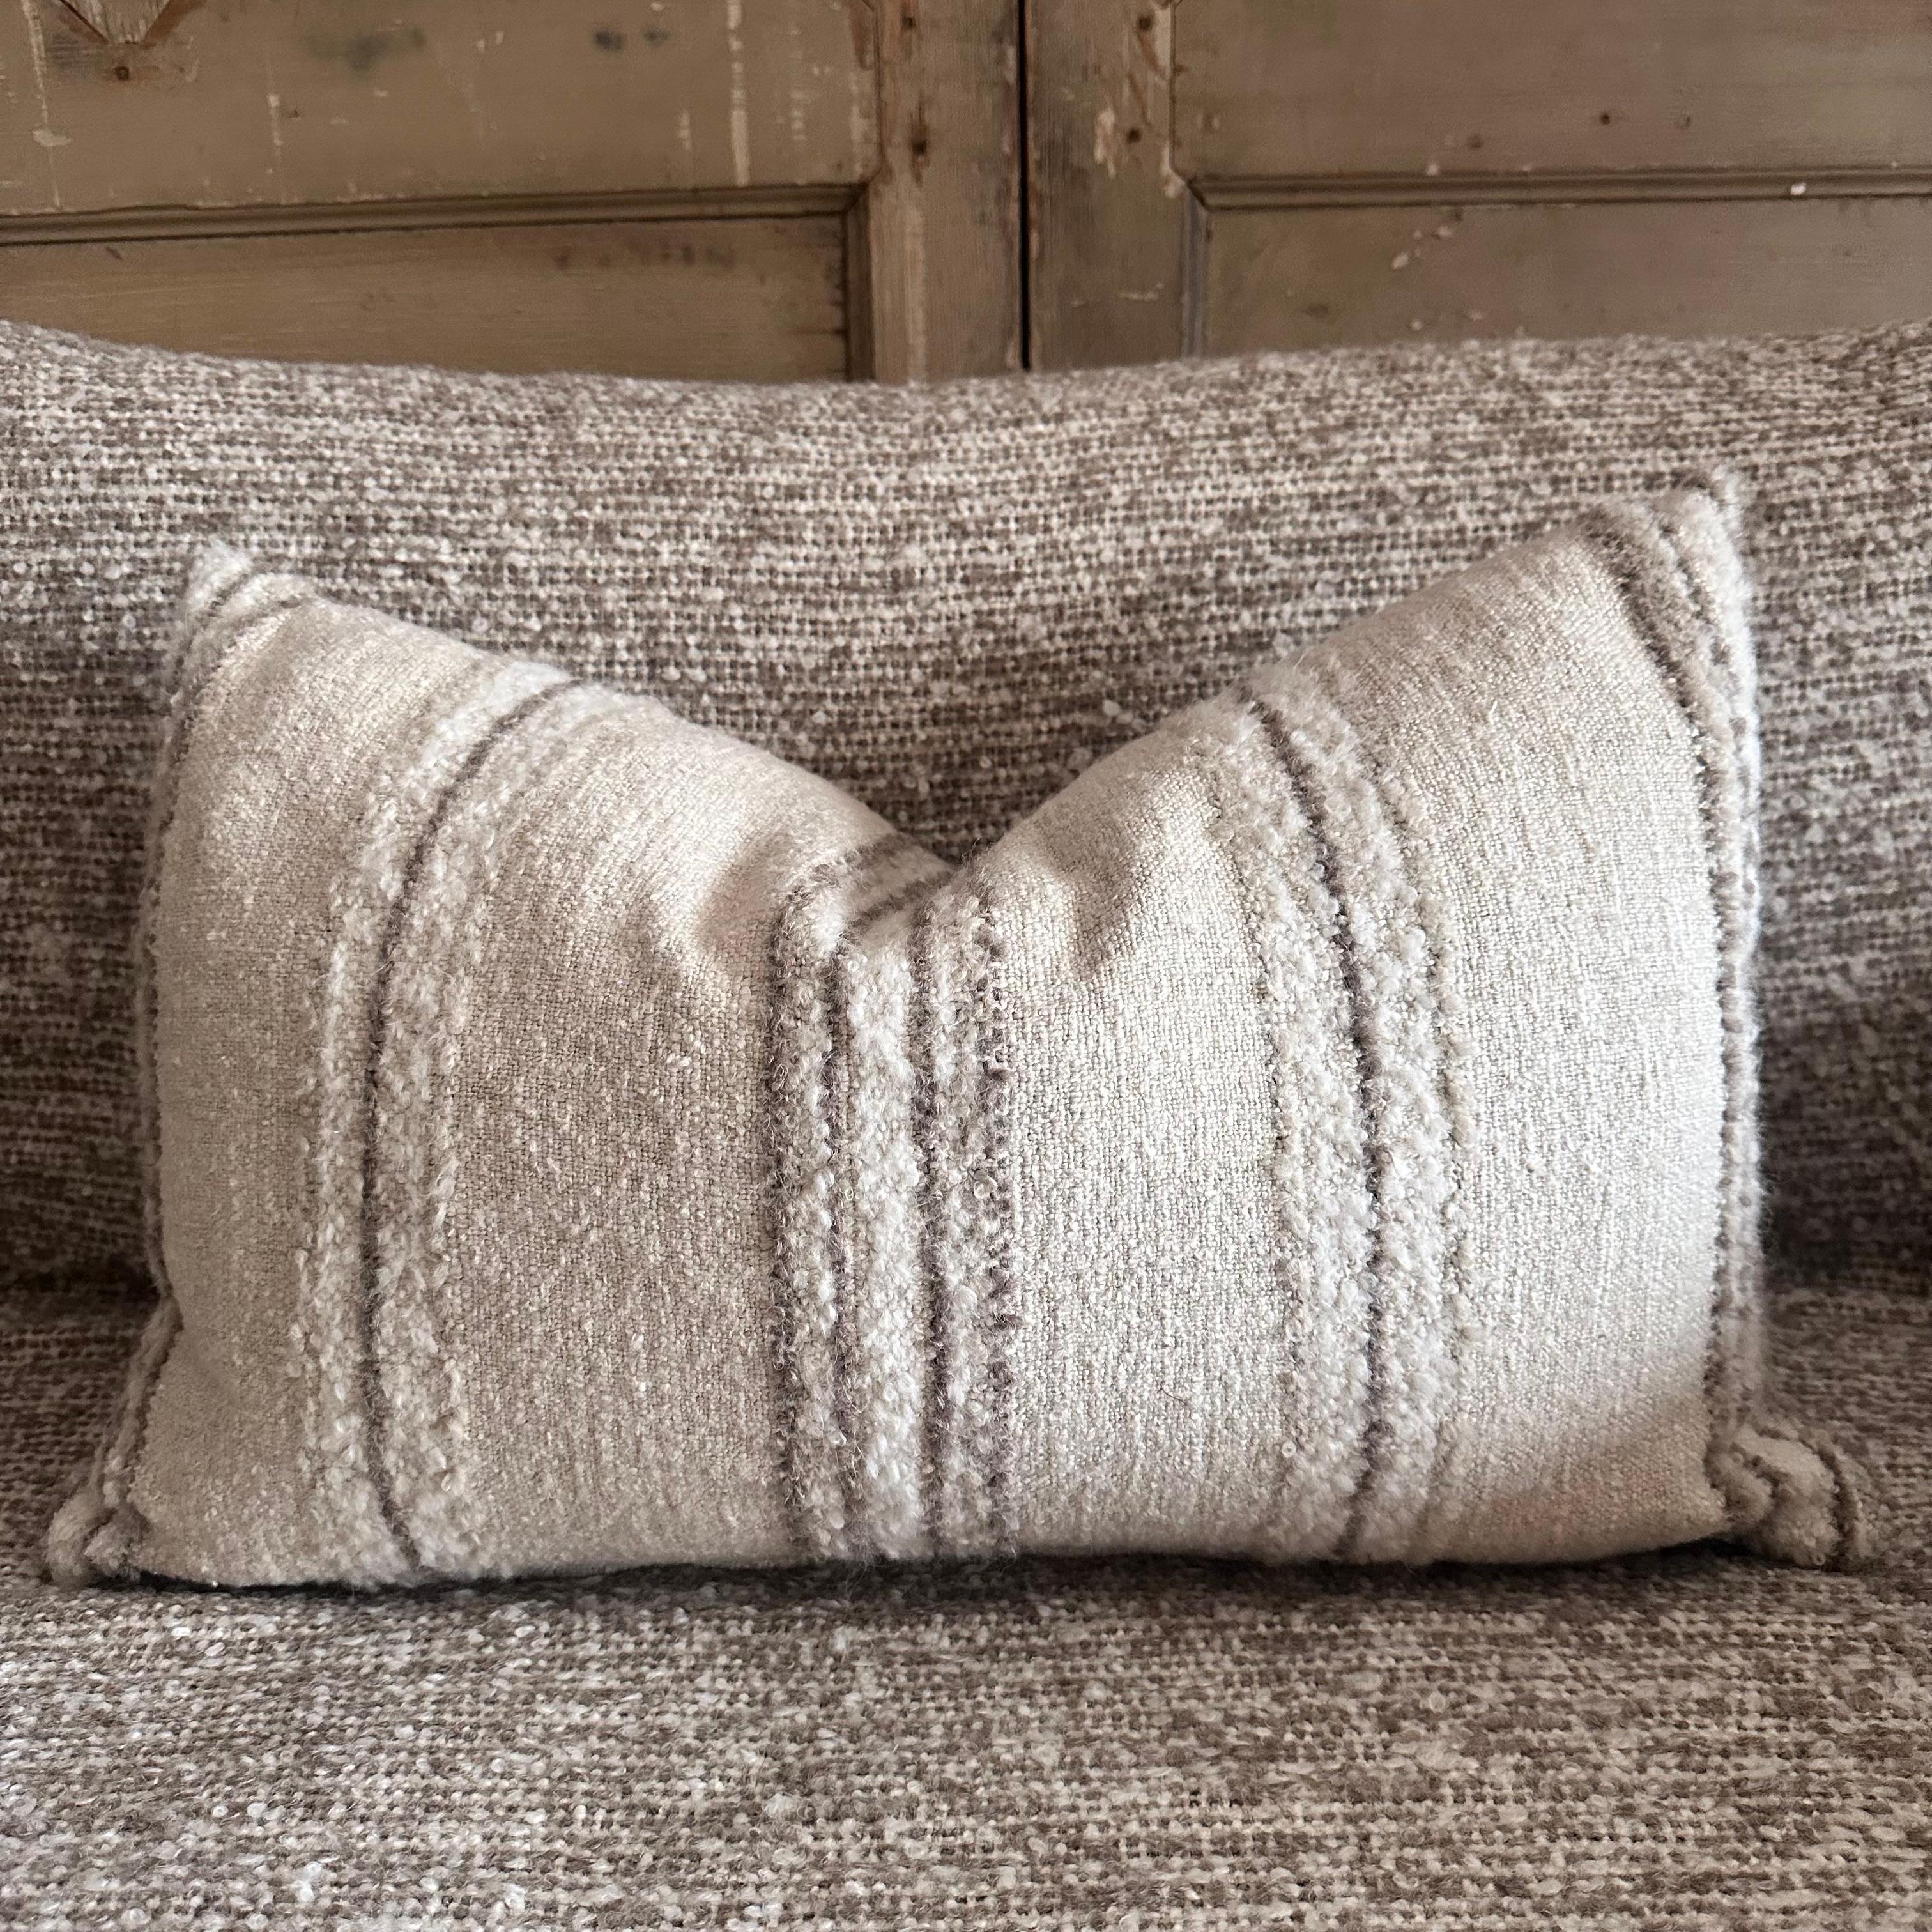 Woven in Belgium the Becker lumbar pillow is a gorgeous combination of Belgian linen and wool. The addition of the raised stripe in this design makes for a truly unique textile.
Color: main is an oatmeal linen
Stripe: ecorce (brown/with eggplant